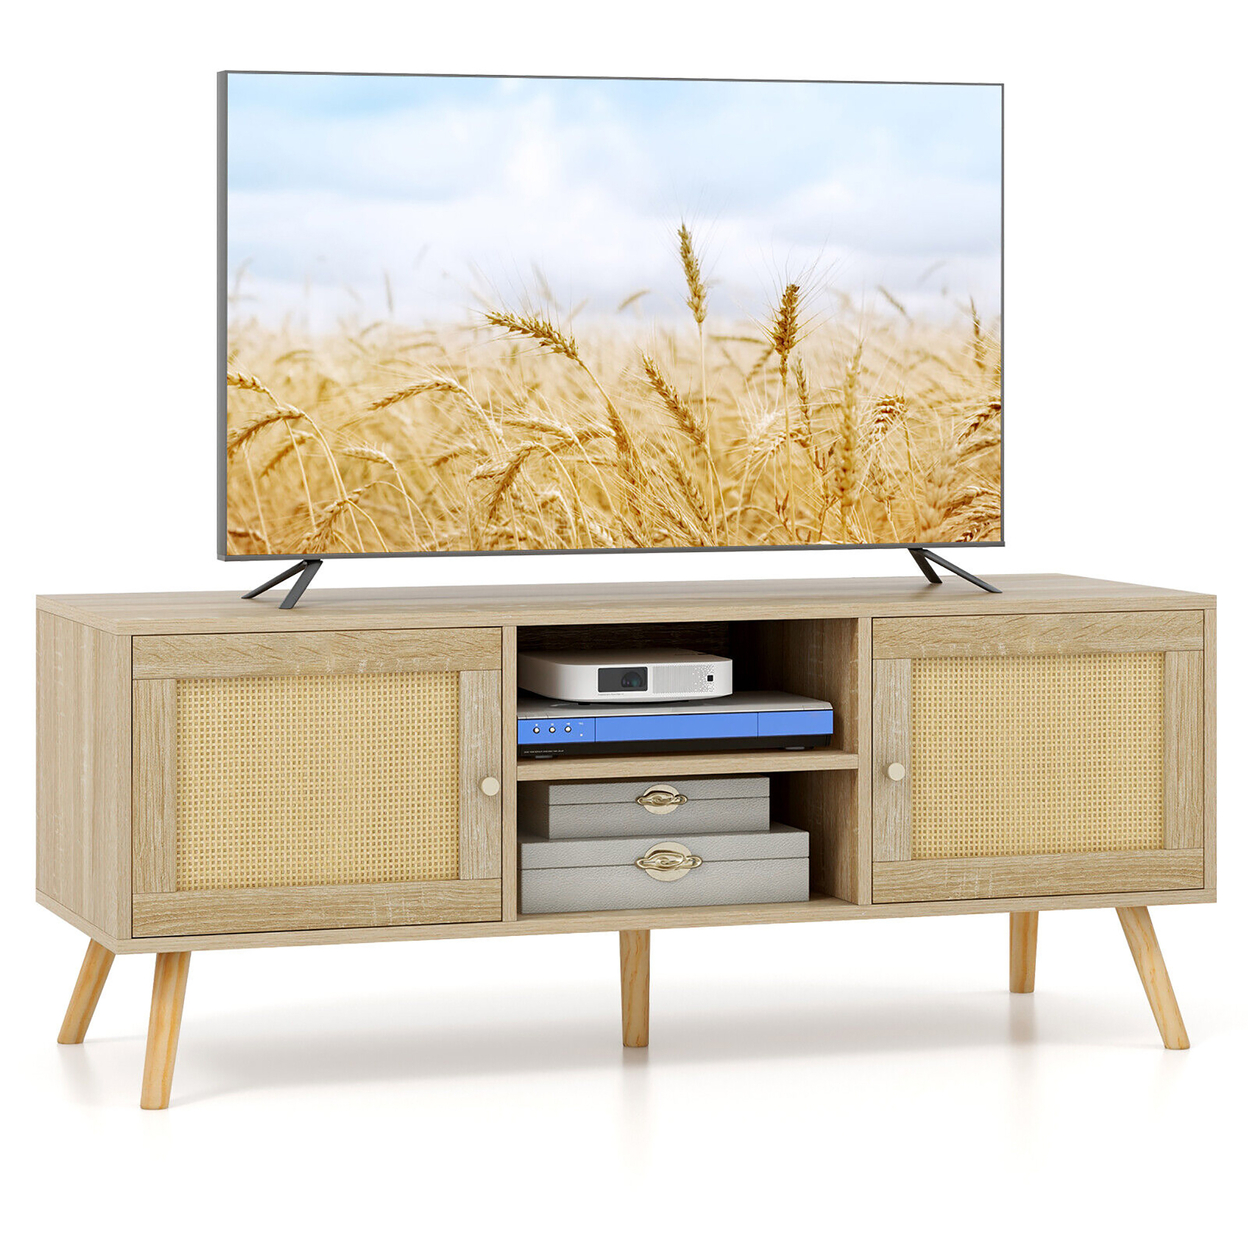 Boho TV Stand PE Rattan Media Console Table W/ Cabinets & Open Shelves